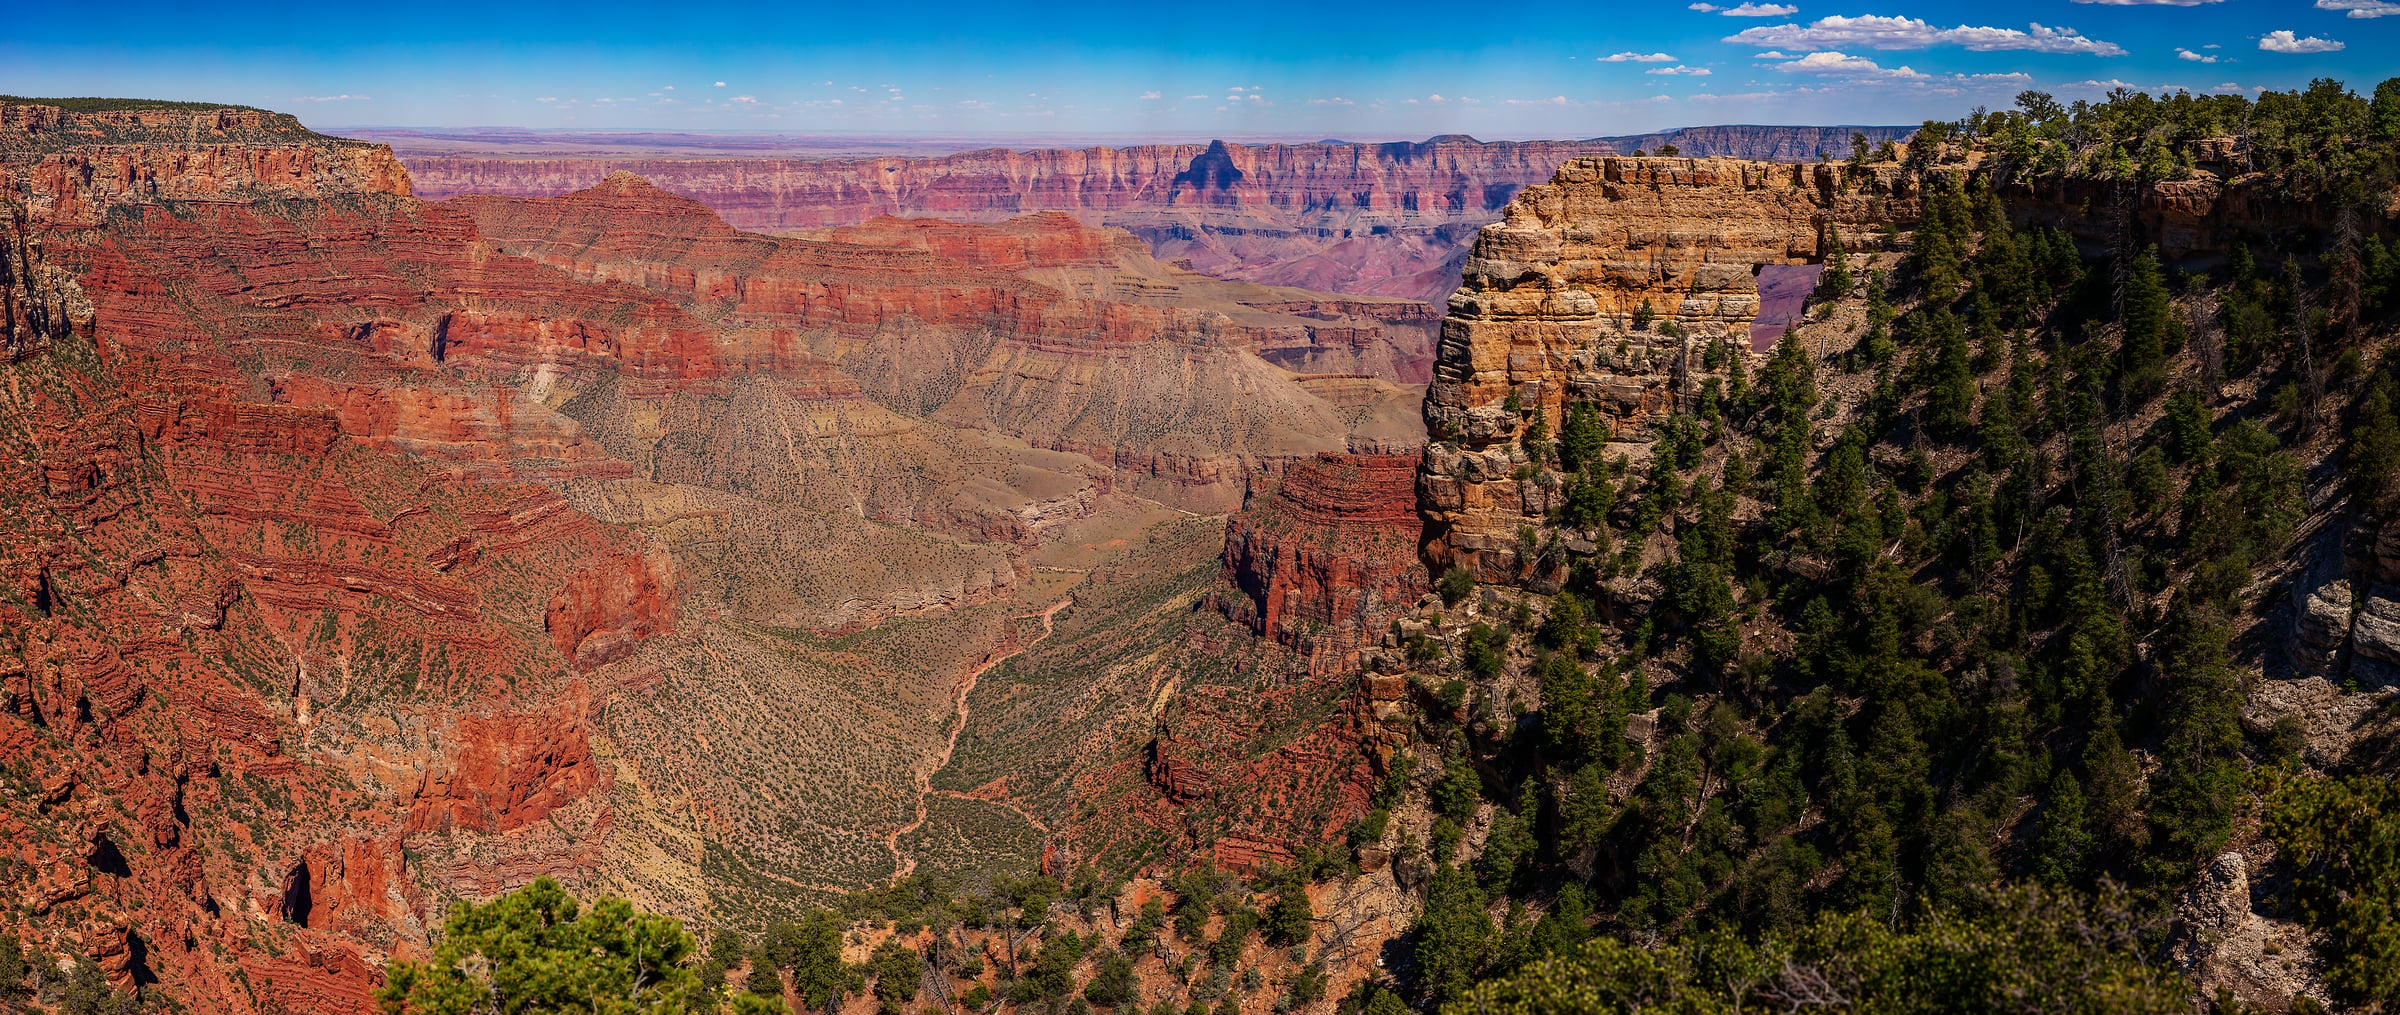 4,150 megapixels! A very high resolution, large-format VAST photo print of the Grand Canyon; landscape photograph created by John Freeman in Cape Royal, North Rim, Grand Canyon National Park, Arizona